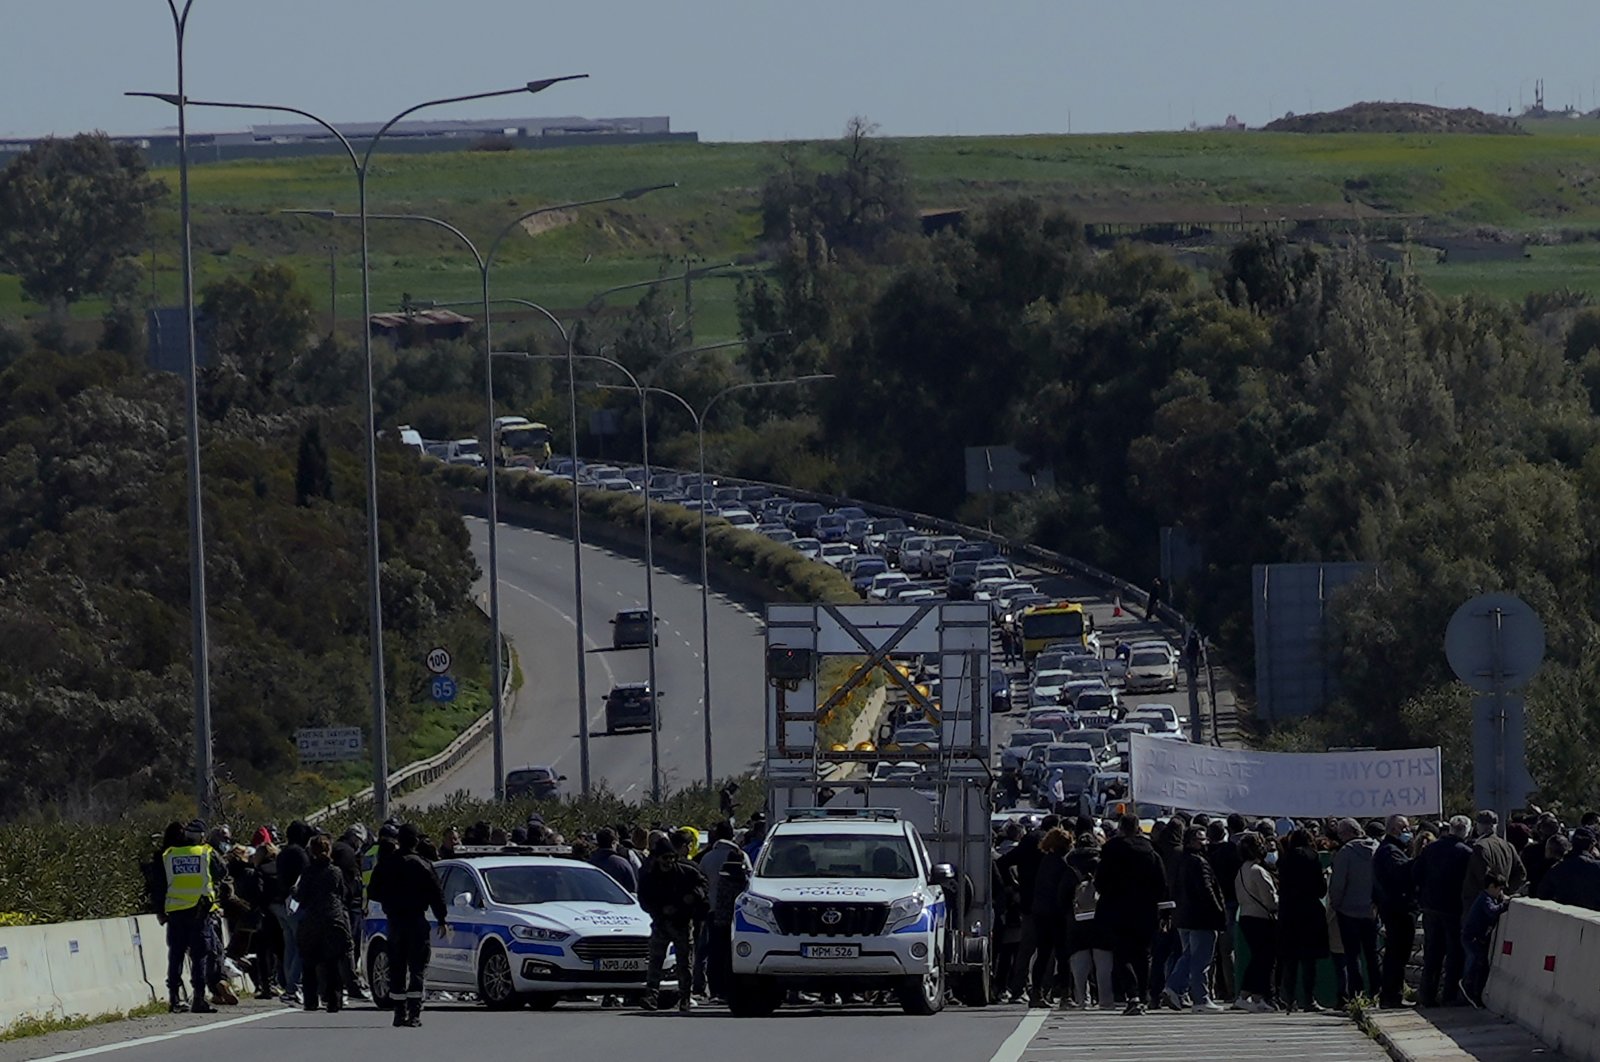 Area residents block a motorway near a refugee camp to protest what they say are the various problems that have arisen as a result of an overflowing migrant reception center near their community, Nicosia, Greek Cyprus, Feb. 20, 2022. (AP Photo)